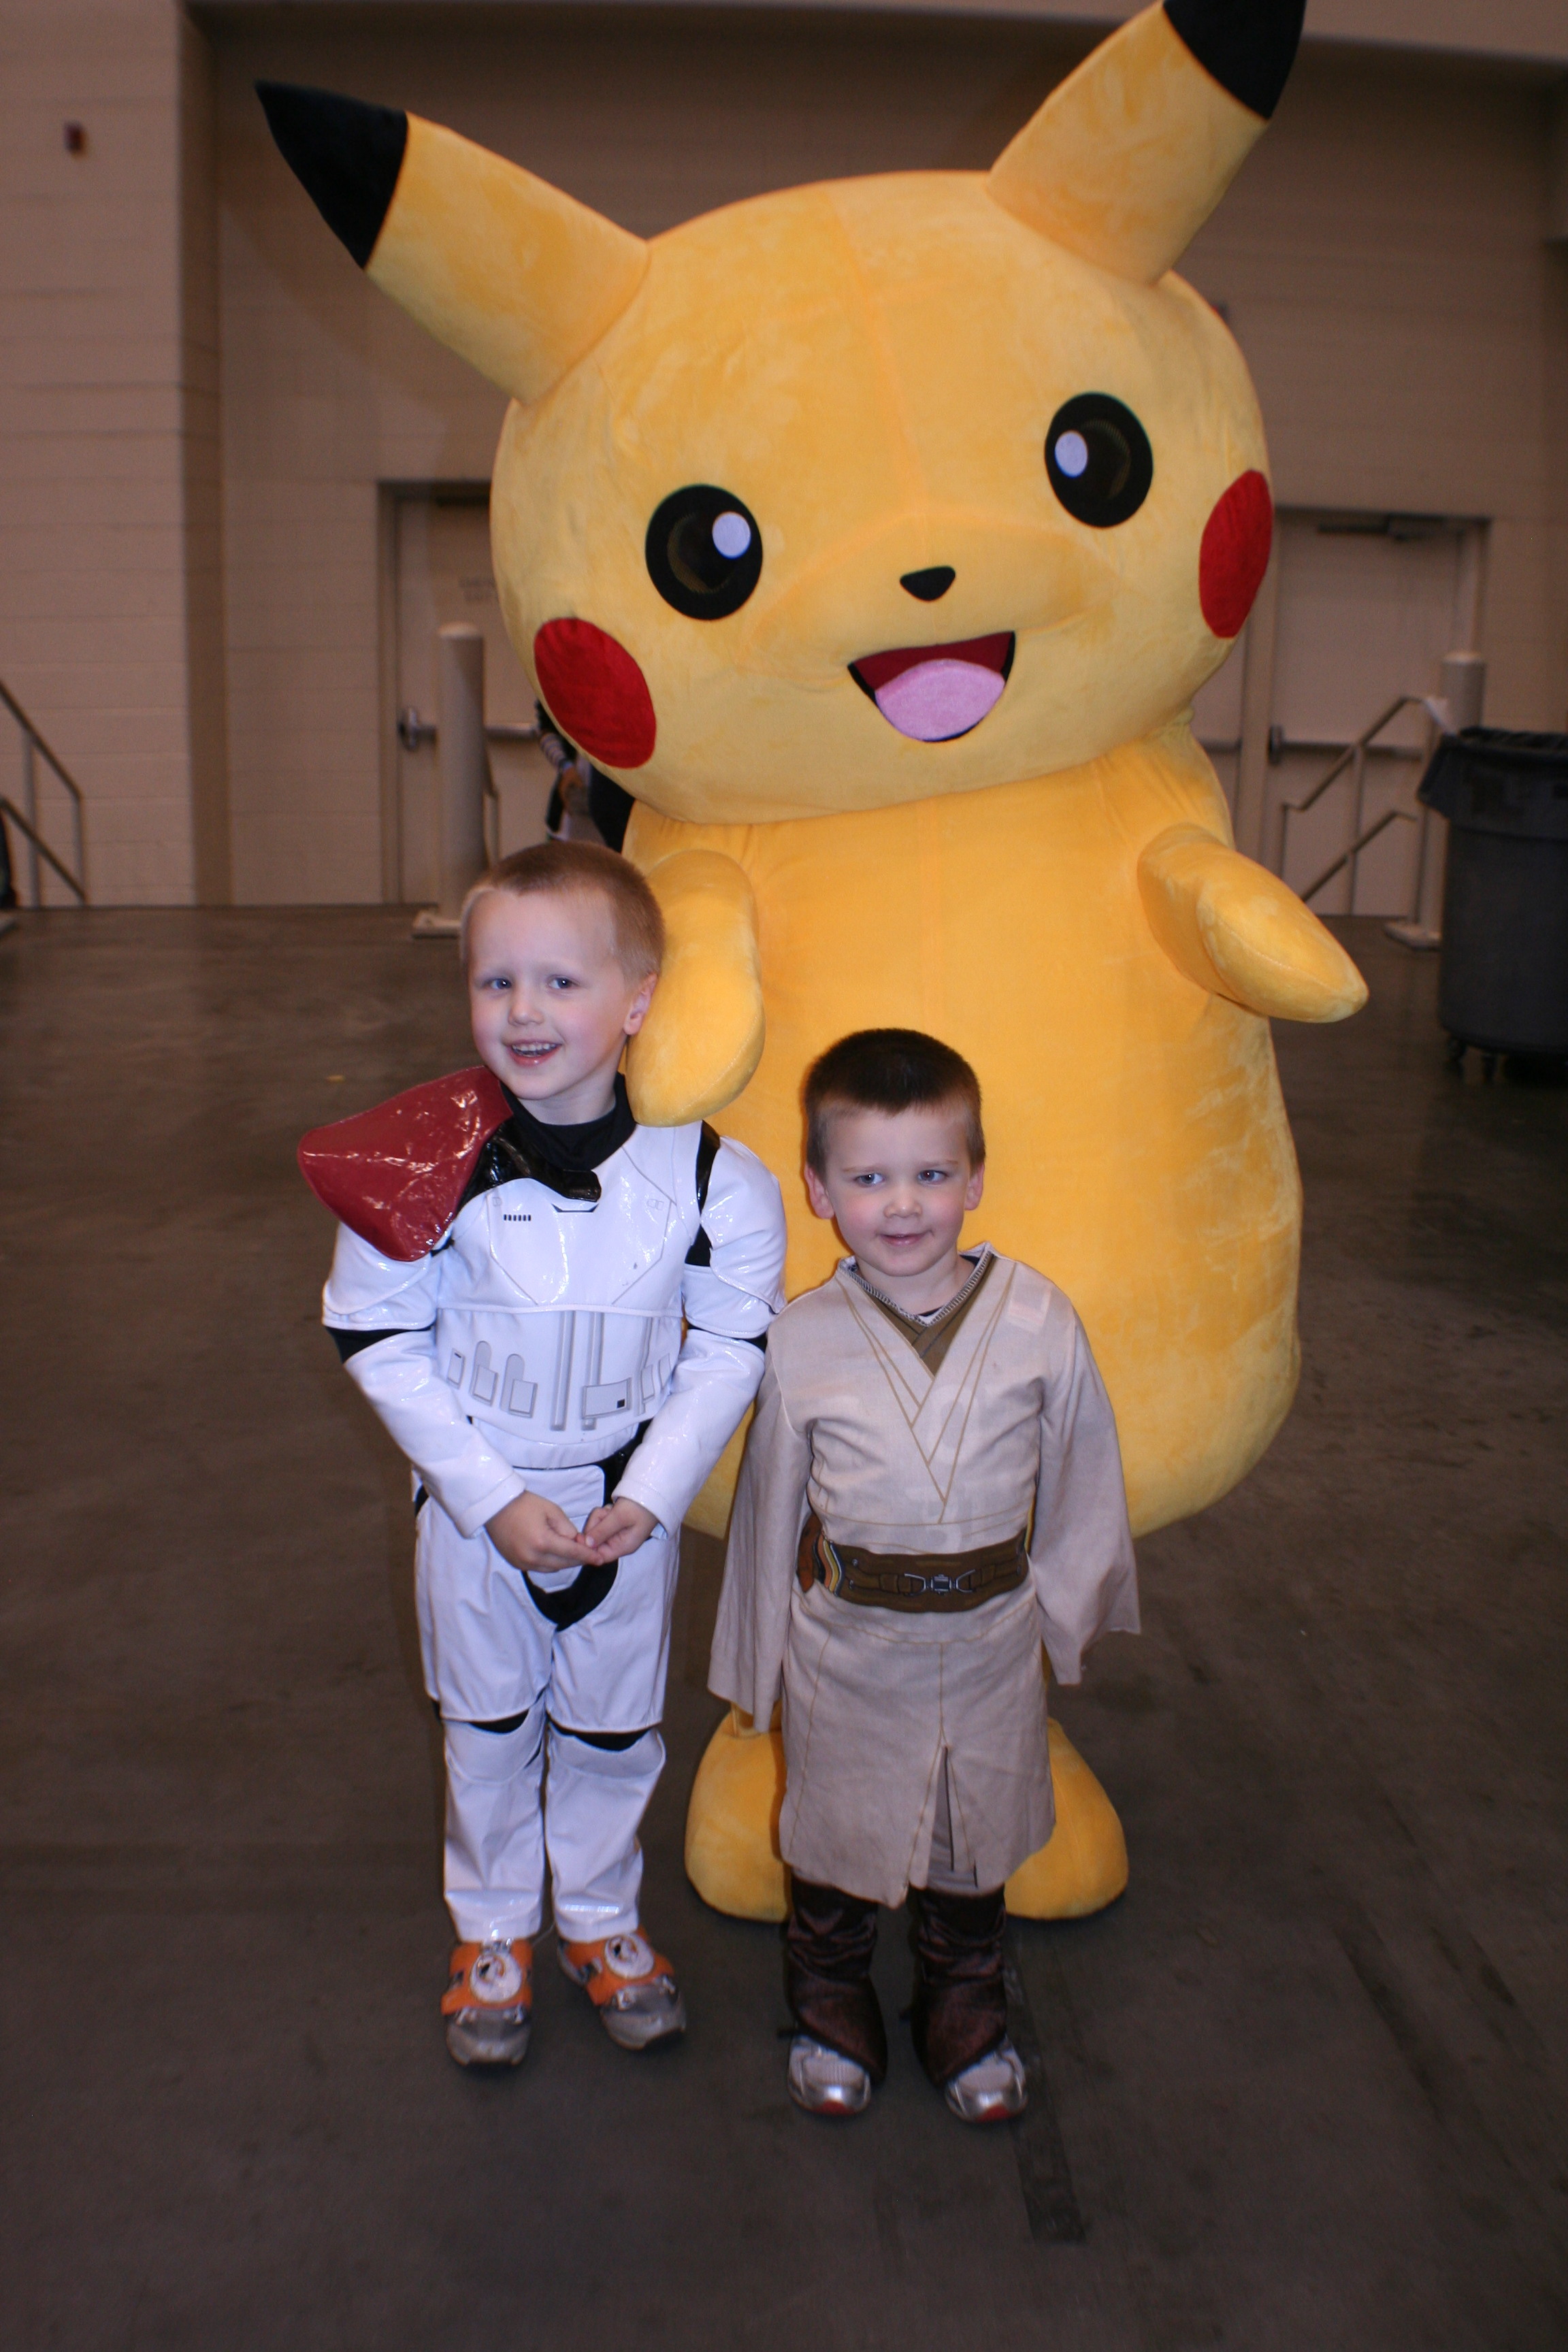 Even Pikachu made an appearance at Grand Rapids Comic Con